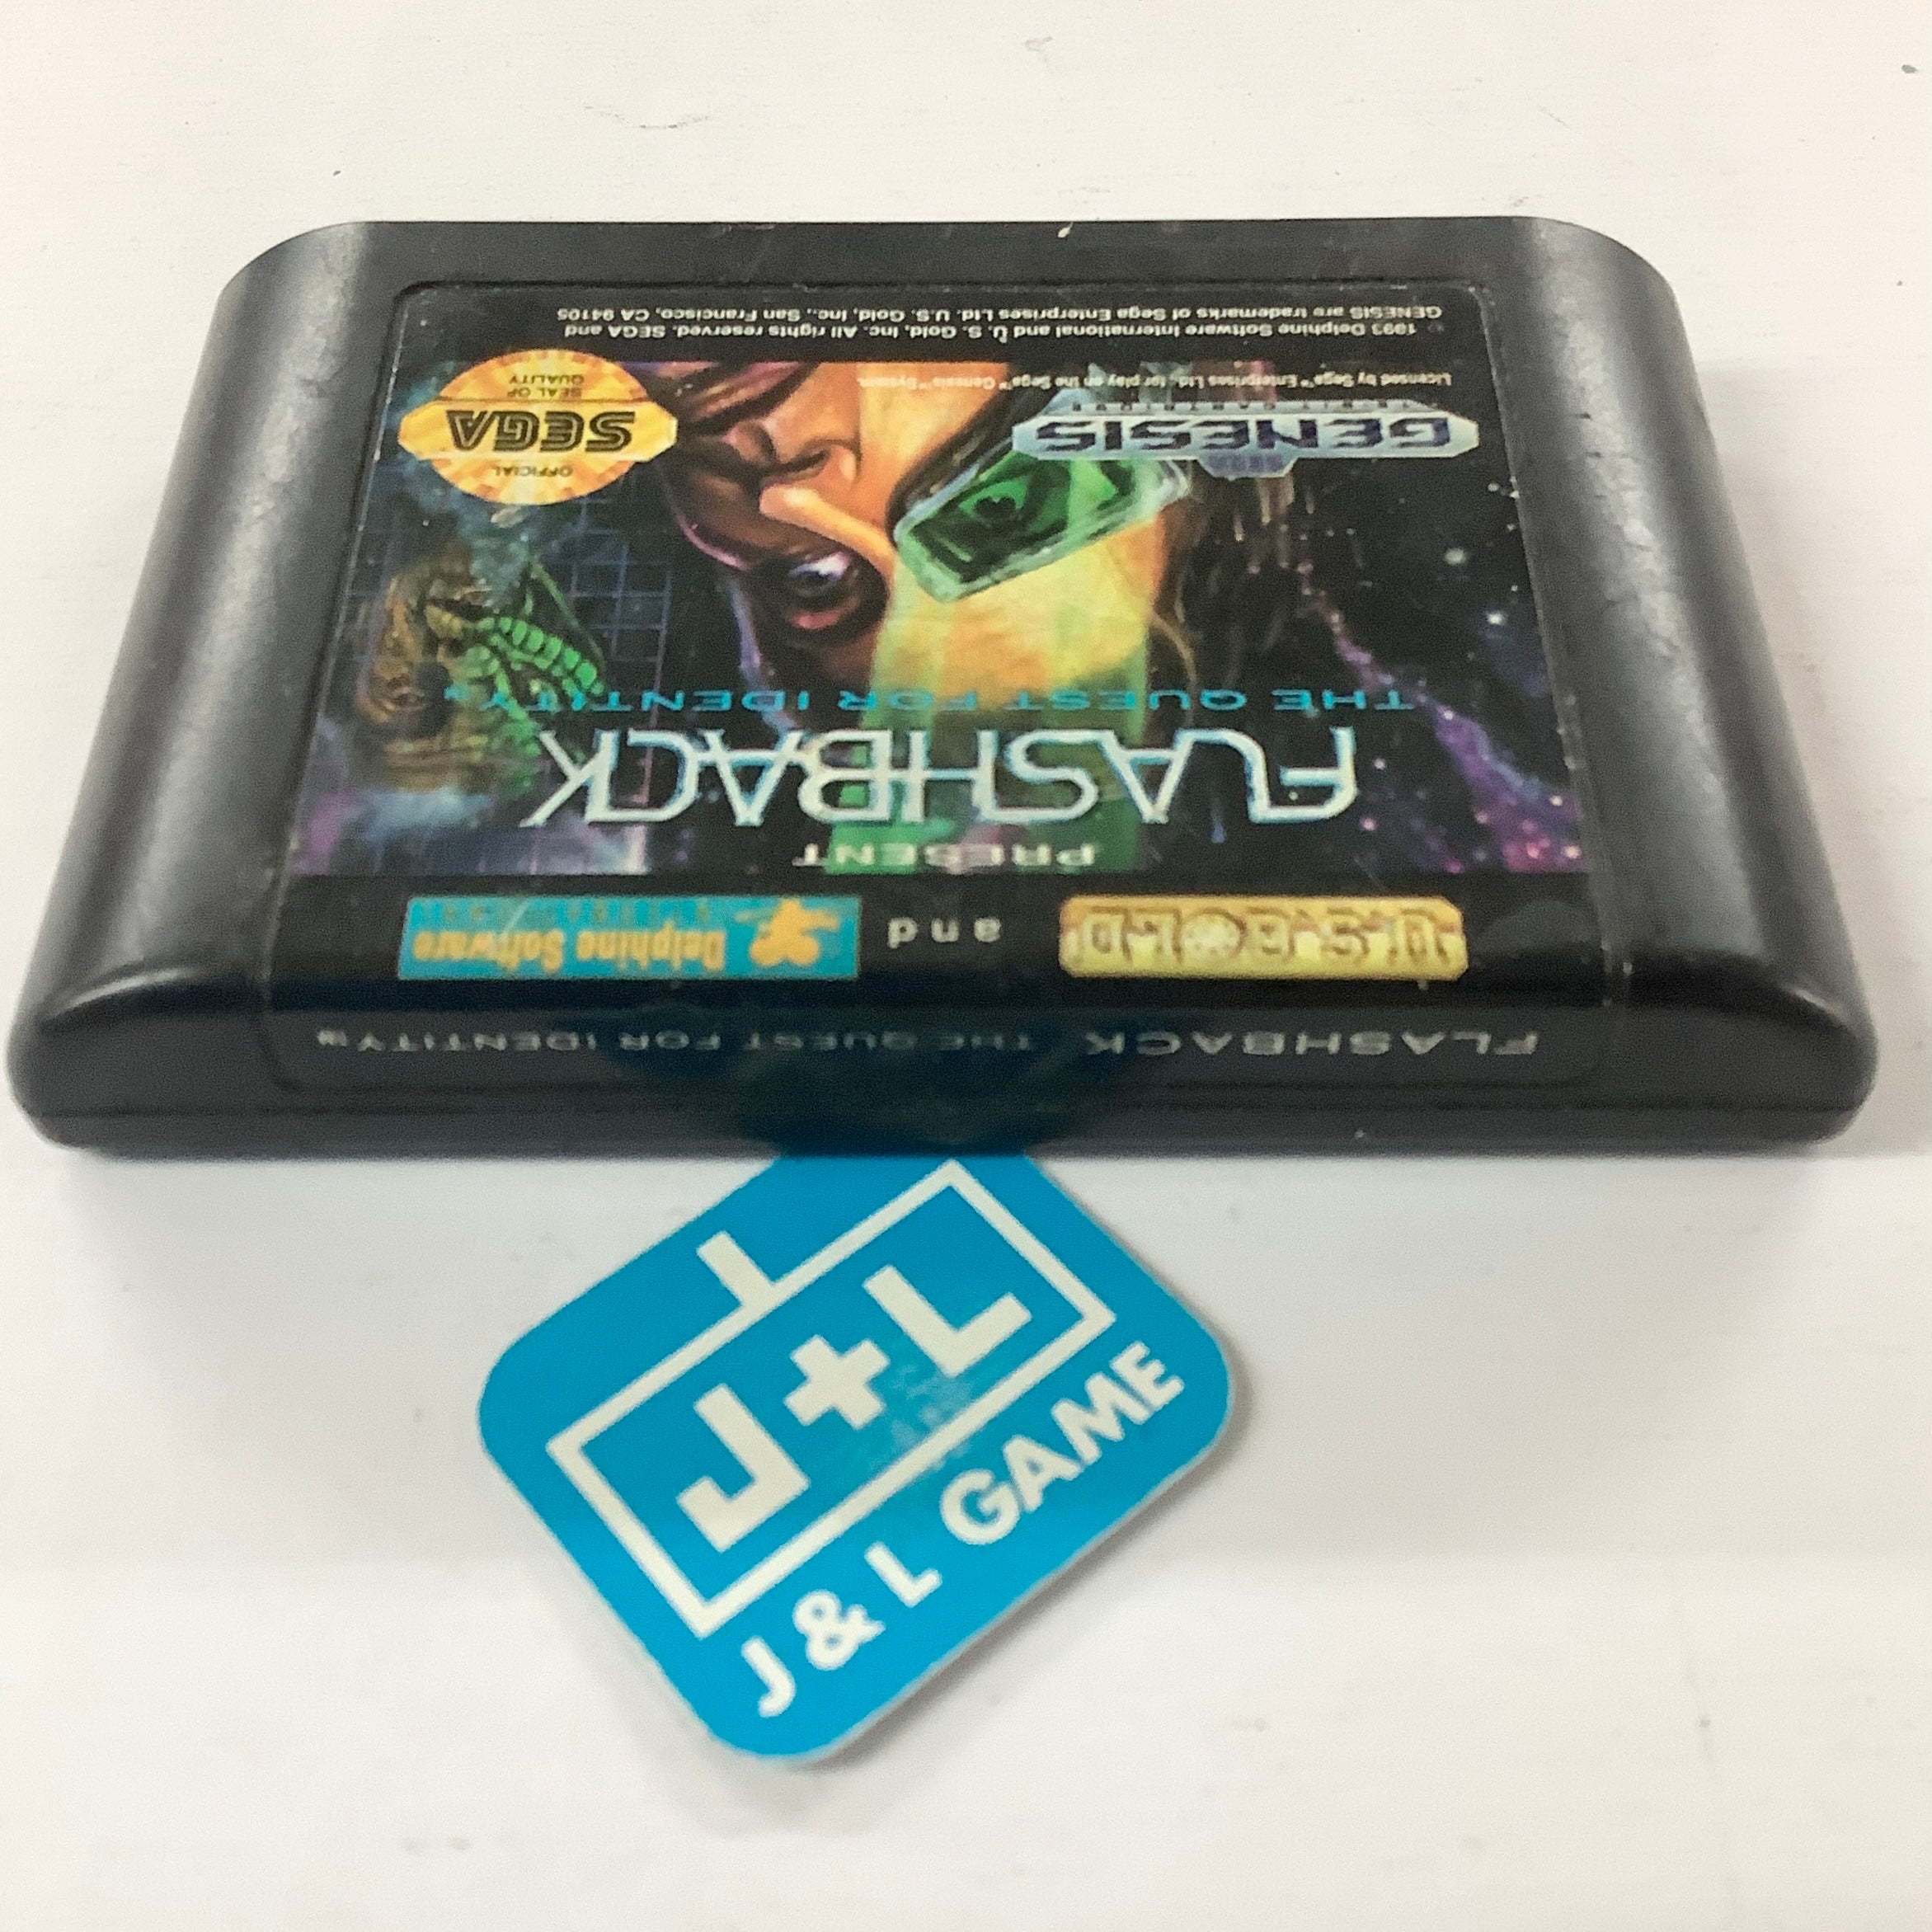 Flashback: The Quest for Identity - (SG) SEGA Genesis [Pre-Owned] Video Games U.S. Gold   